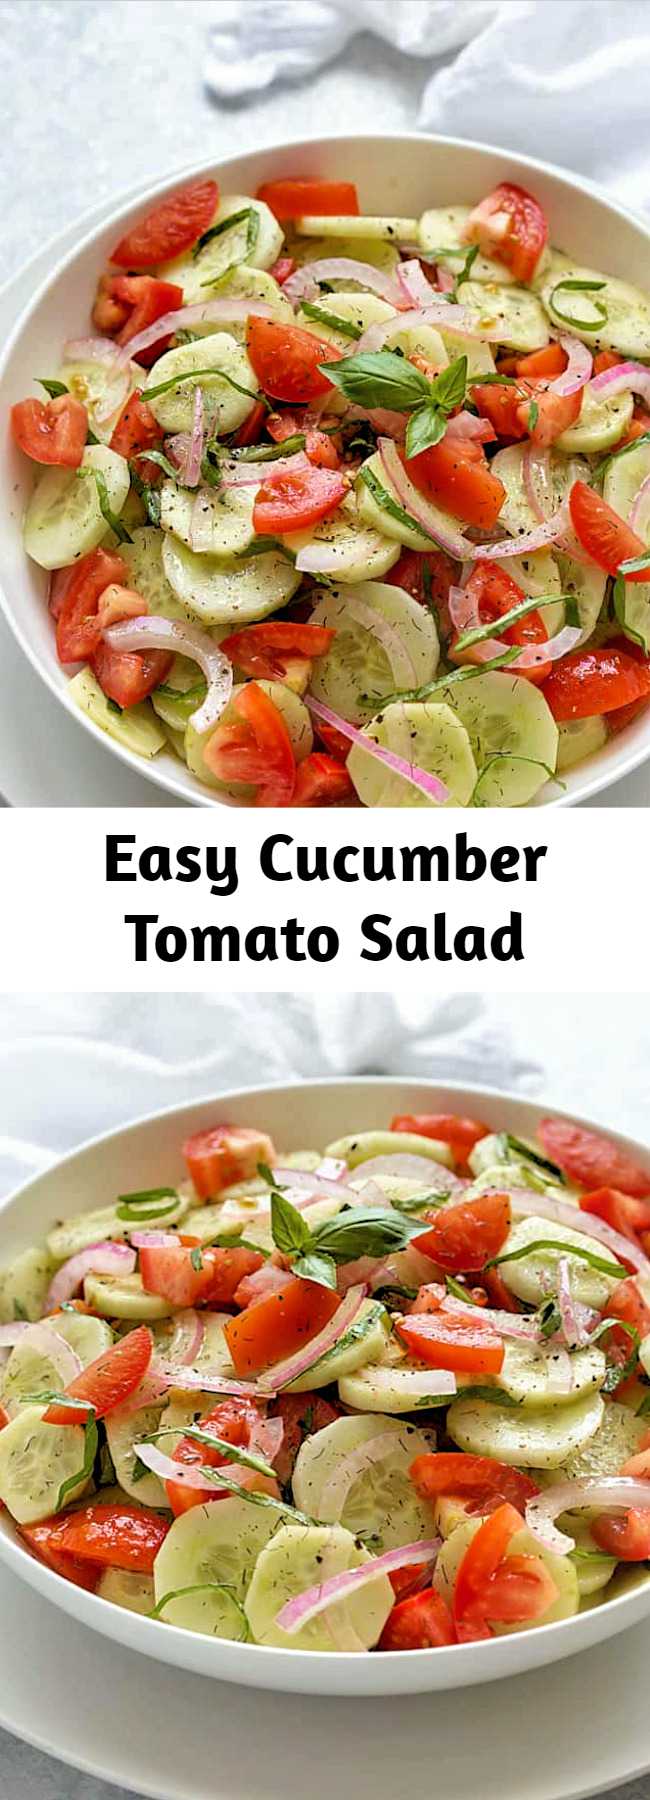 Vegan Gluten free · This Cucumber Tomato Salad seasoned with dill and fresh basil in a homemade vinaigrette is an easy, healthy and flavorful side salad!